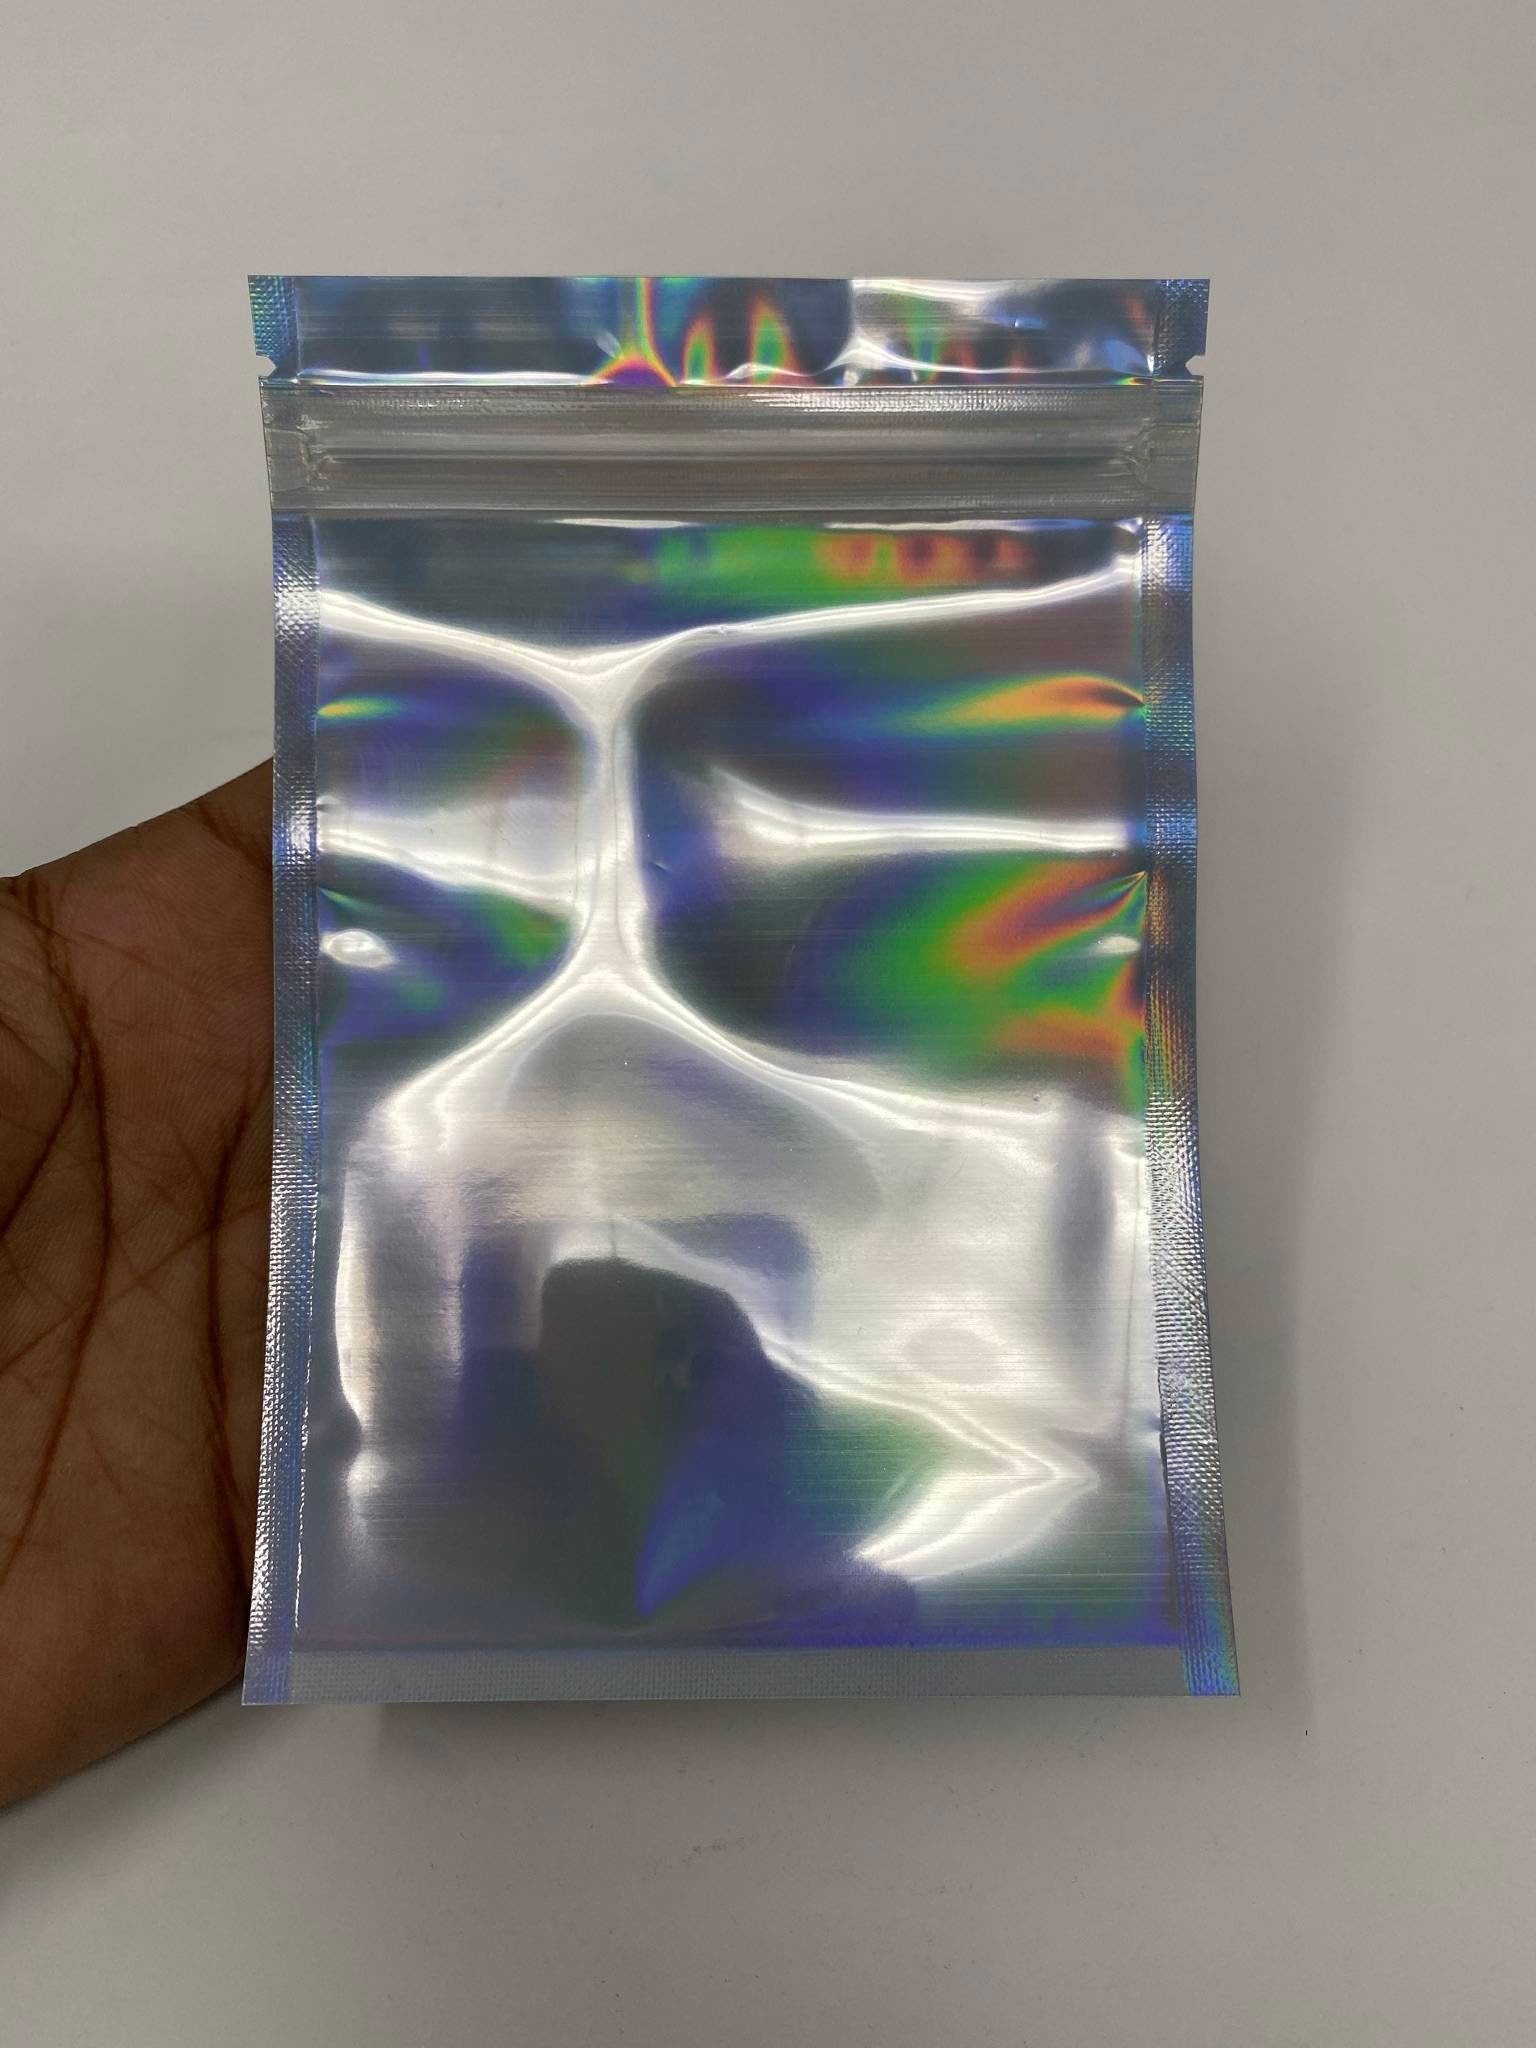 Bags: 100 pc, Smell Proof Holographic Bags for Food or Product; Size 4x6", Resealable Bags, Weed Bags, Product Bags, Cookie Bags, Laser Bags